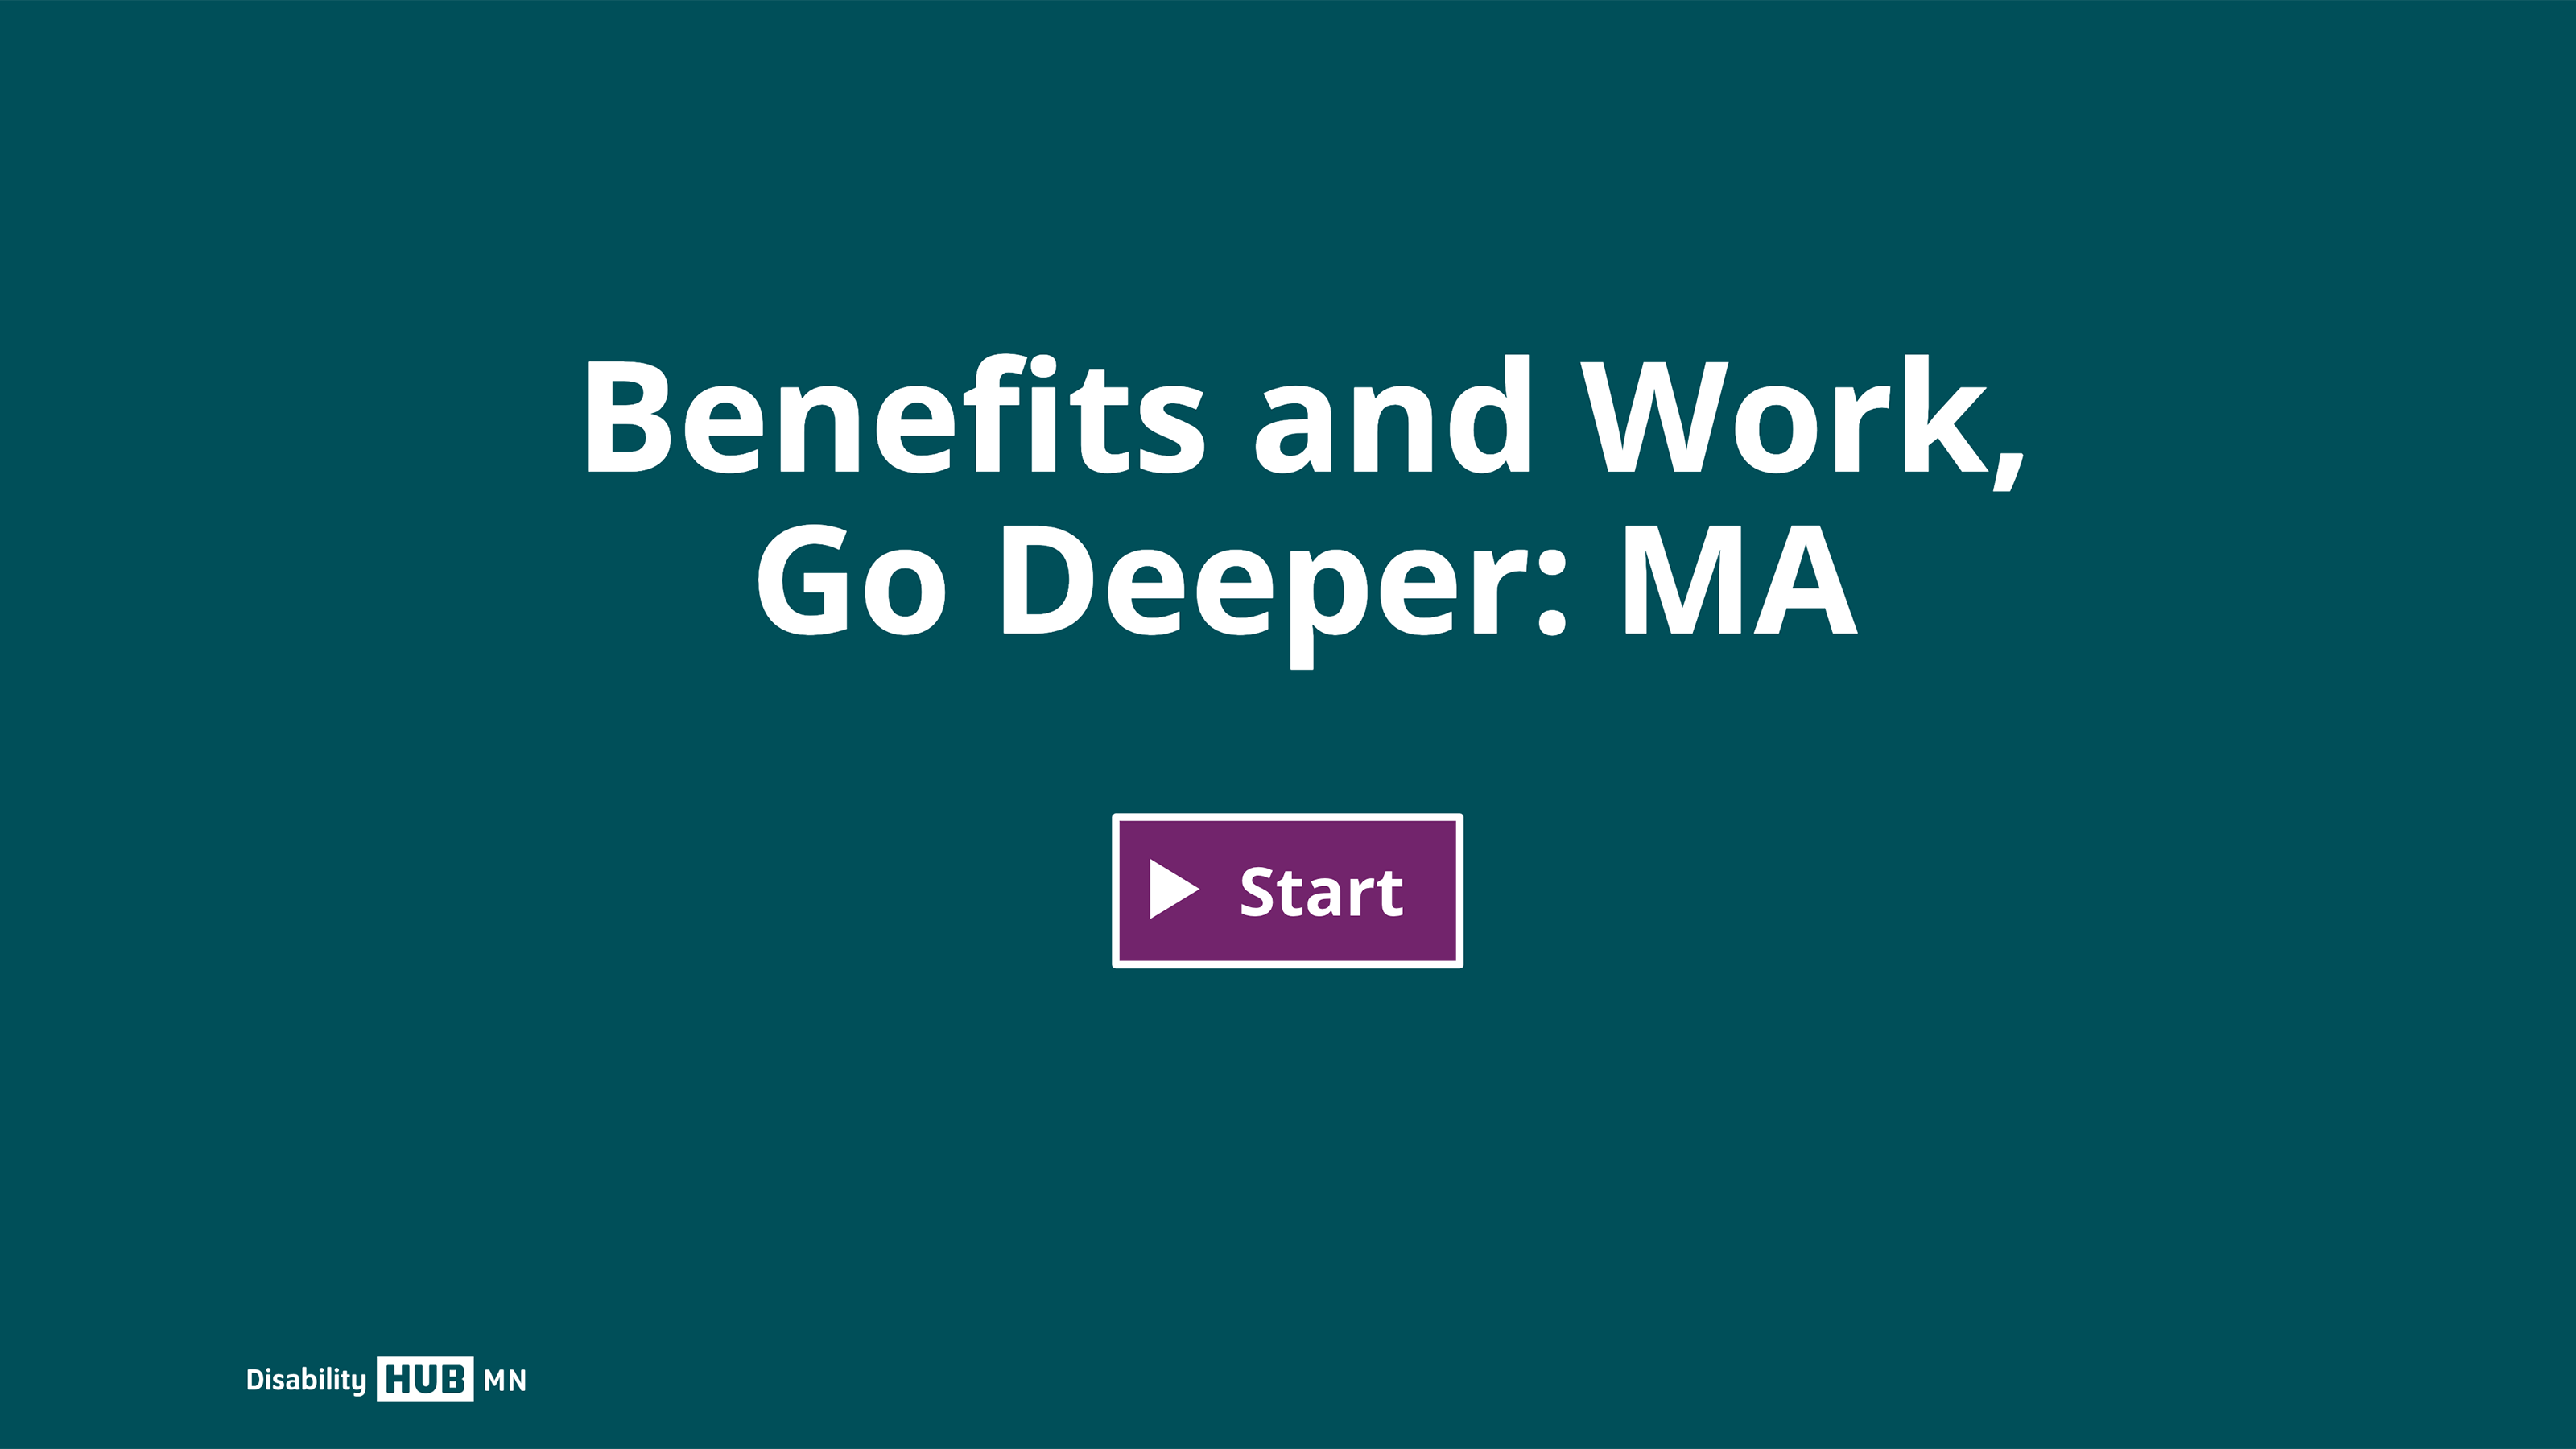 Click this image to begin the Benefits and Work, Go Deeper: MA e-learning